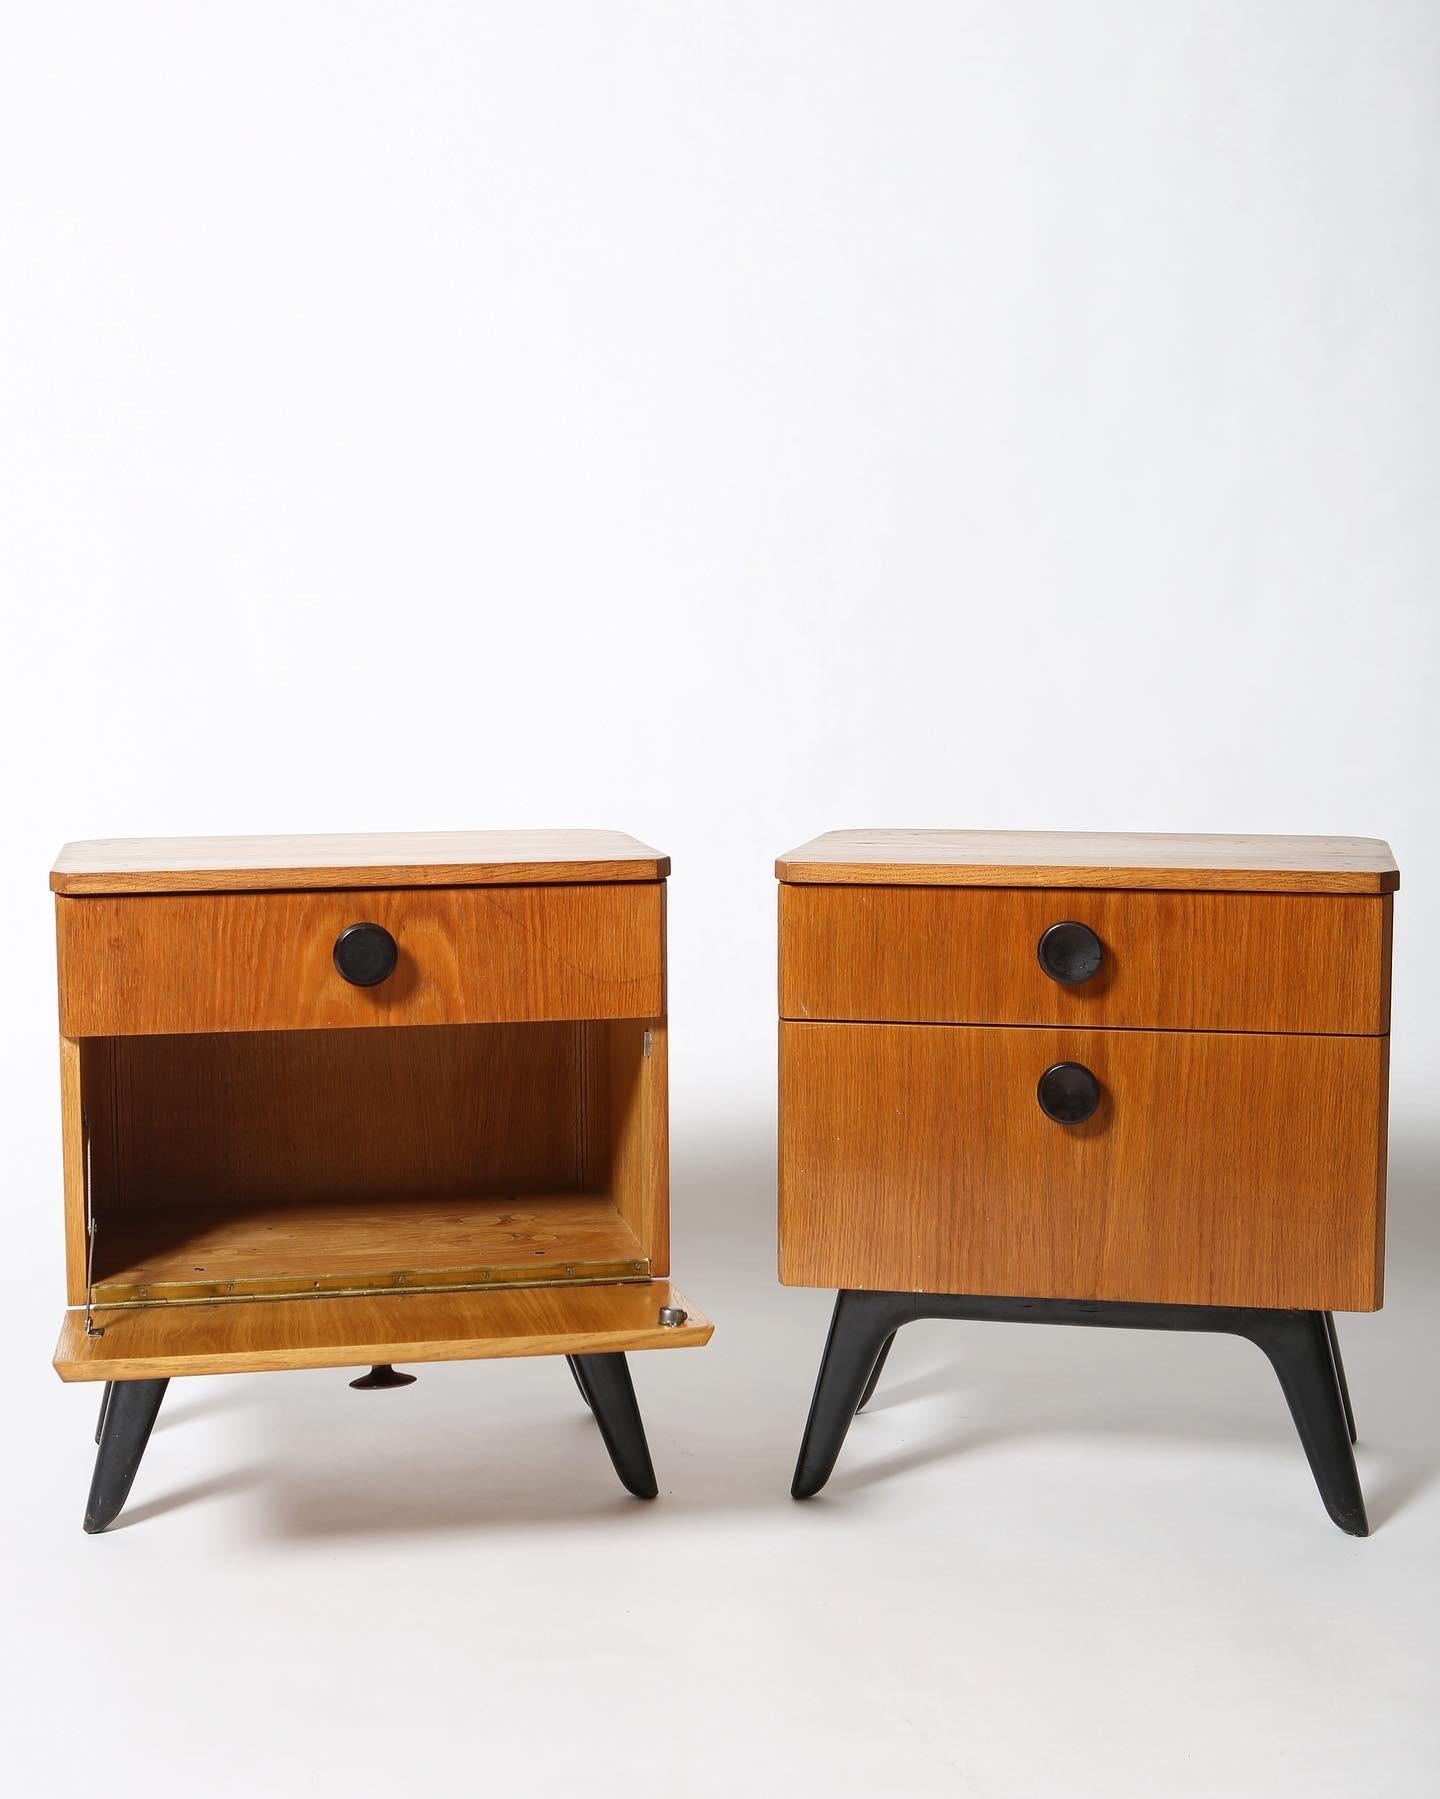 Charming pair of modernist solid oak side tables by Jindrich Halabala. Czech Republic circa 1940s. Each with a top drawer and drop cabinet for storage. Rounded back corners and the wonderful patina of 70 years in use. Excellent condition.